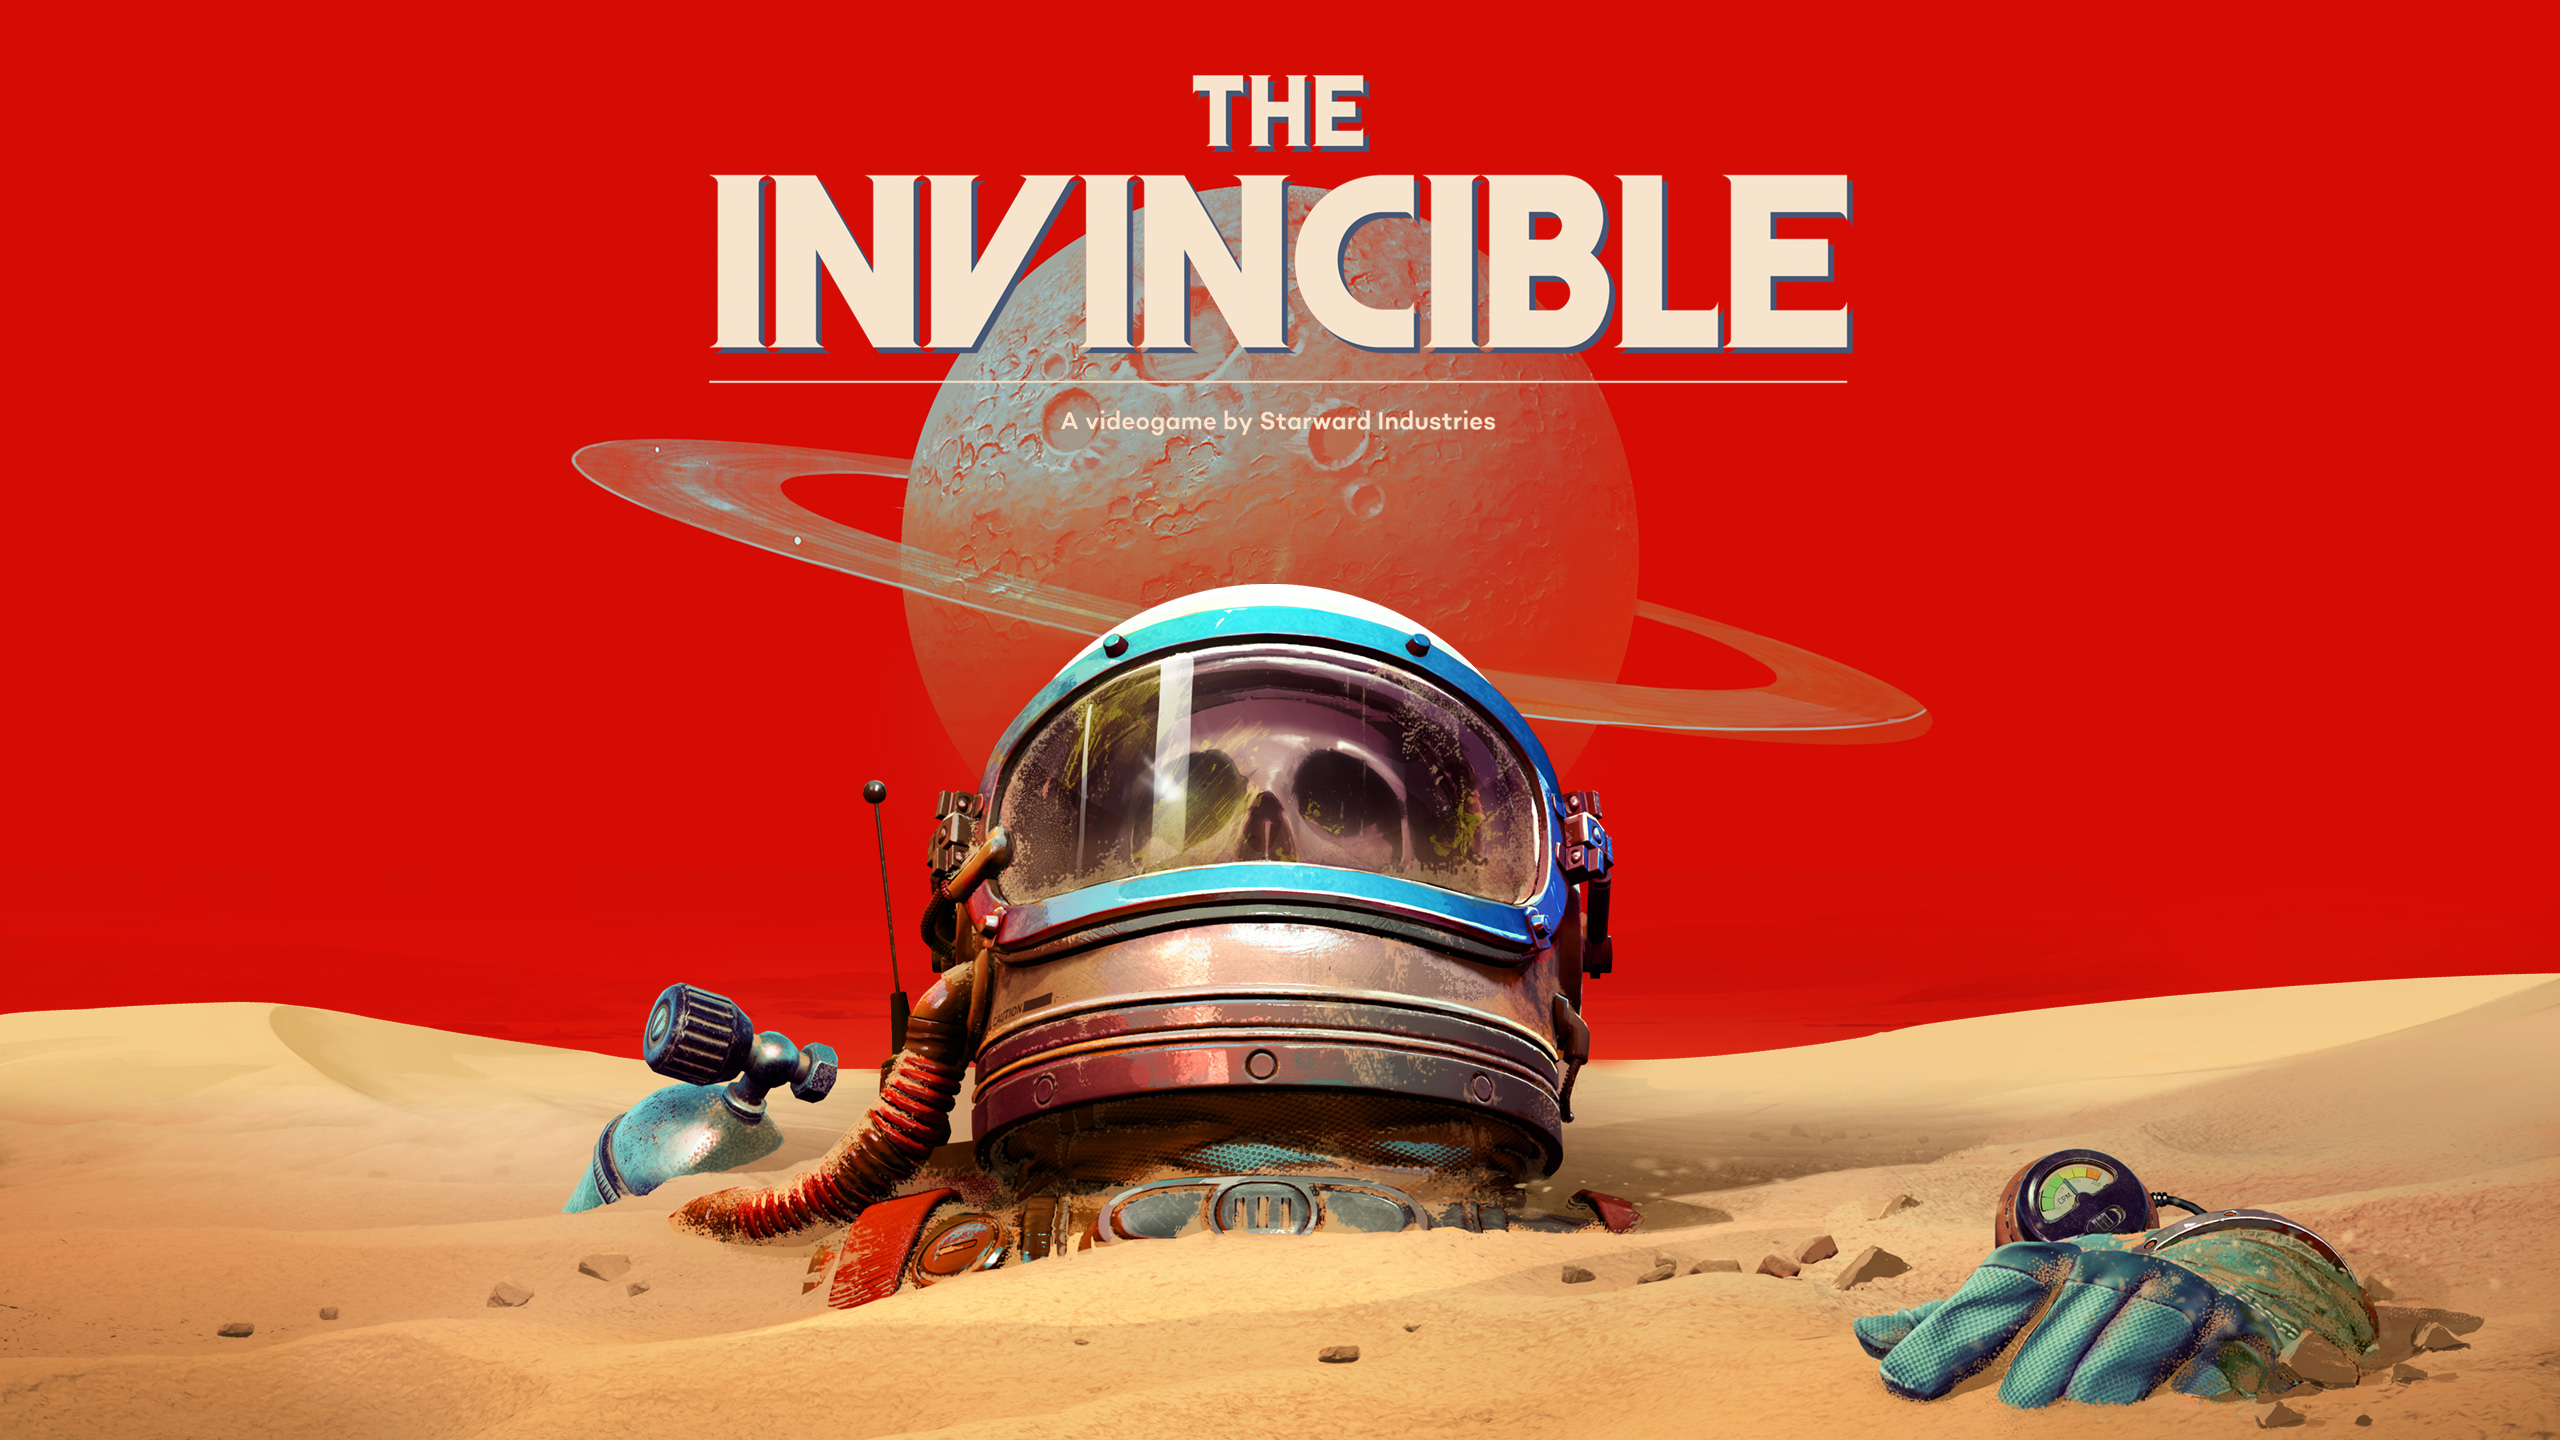 Sales of The Invincible have surpassed 123 thousand copies - developers thank gamers for interest in their game